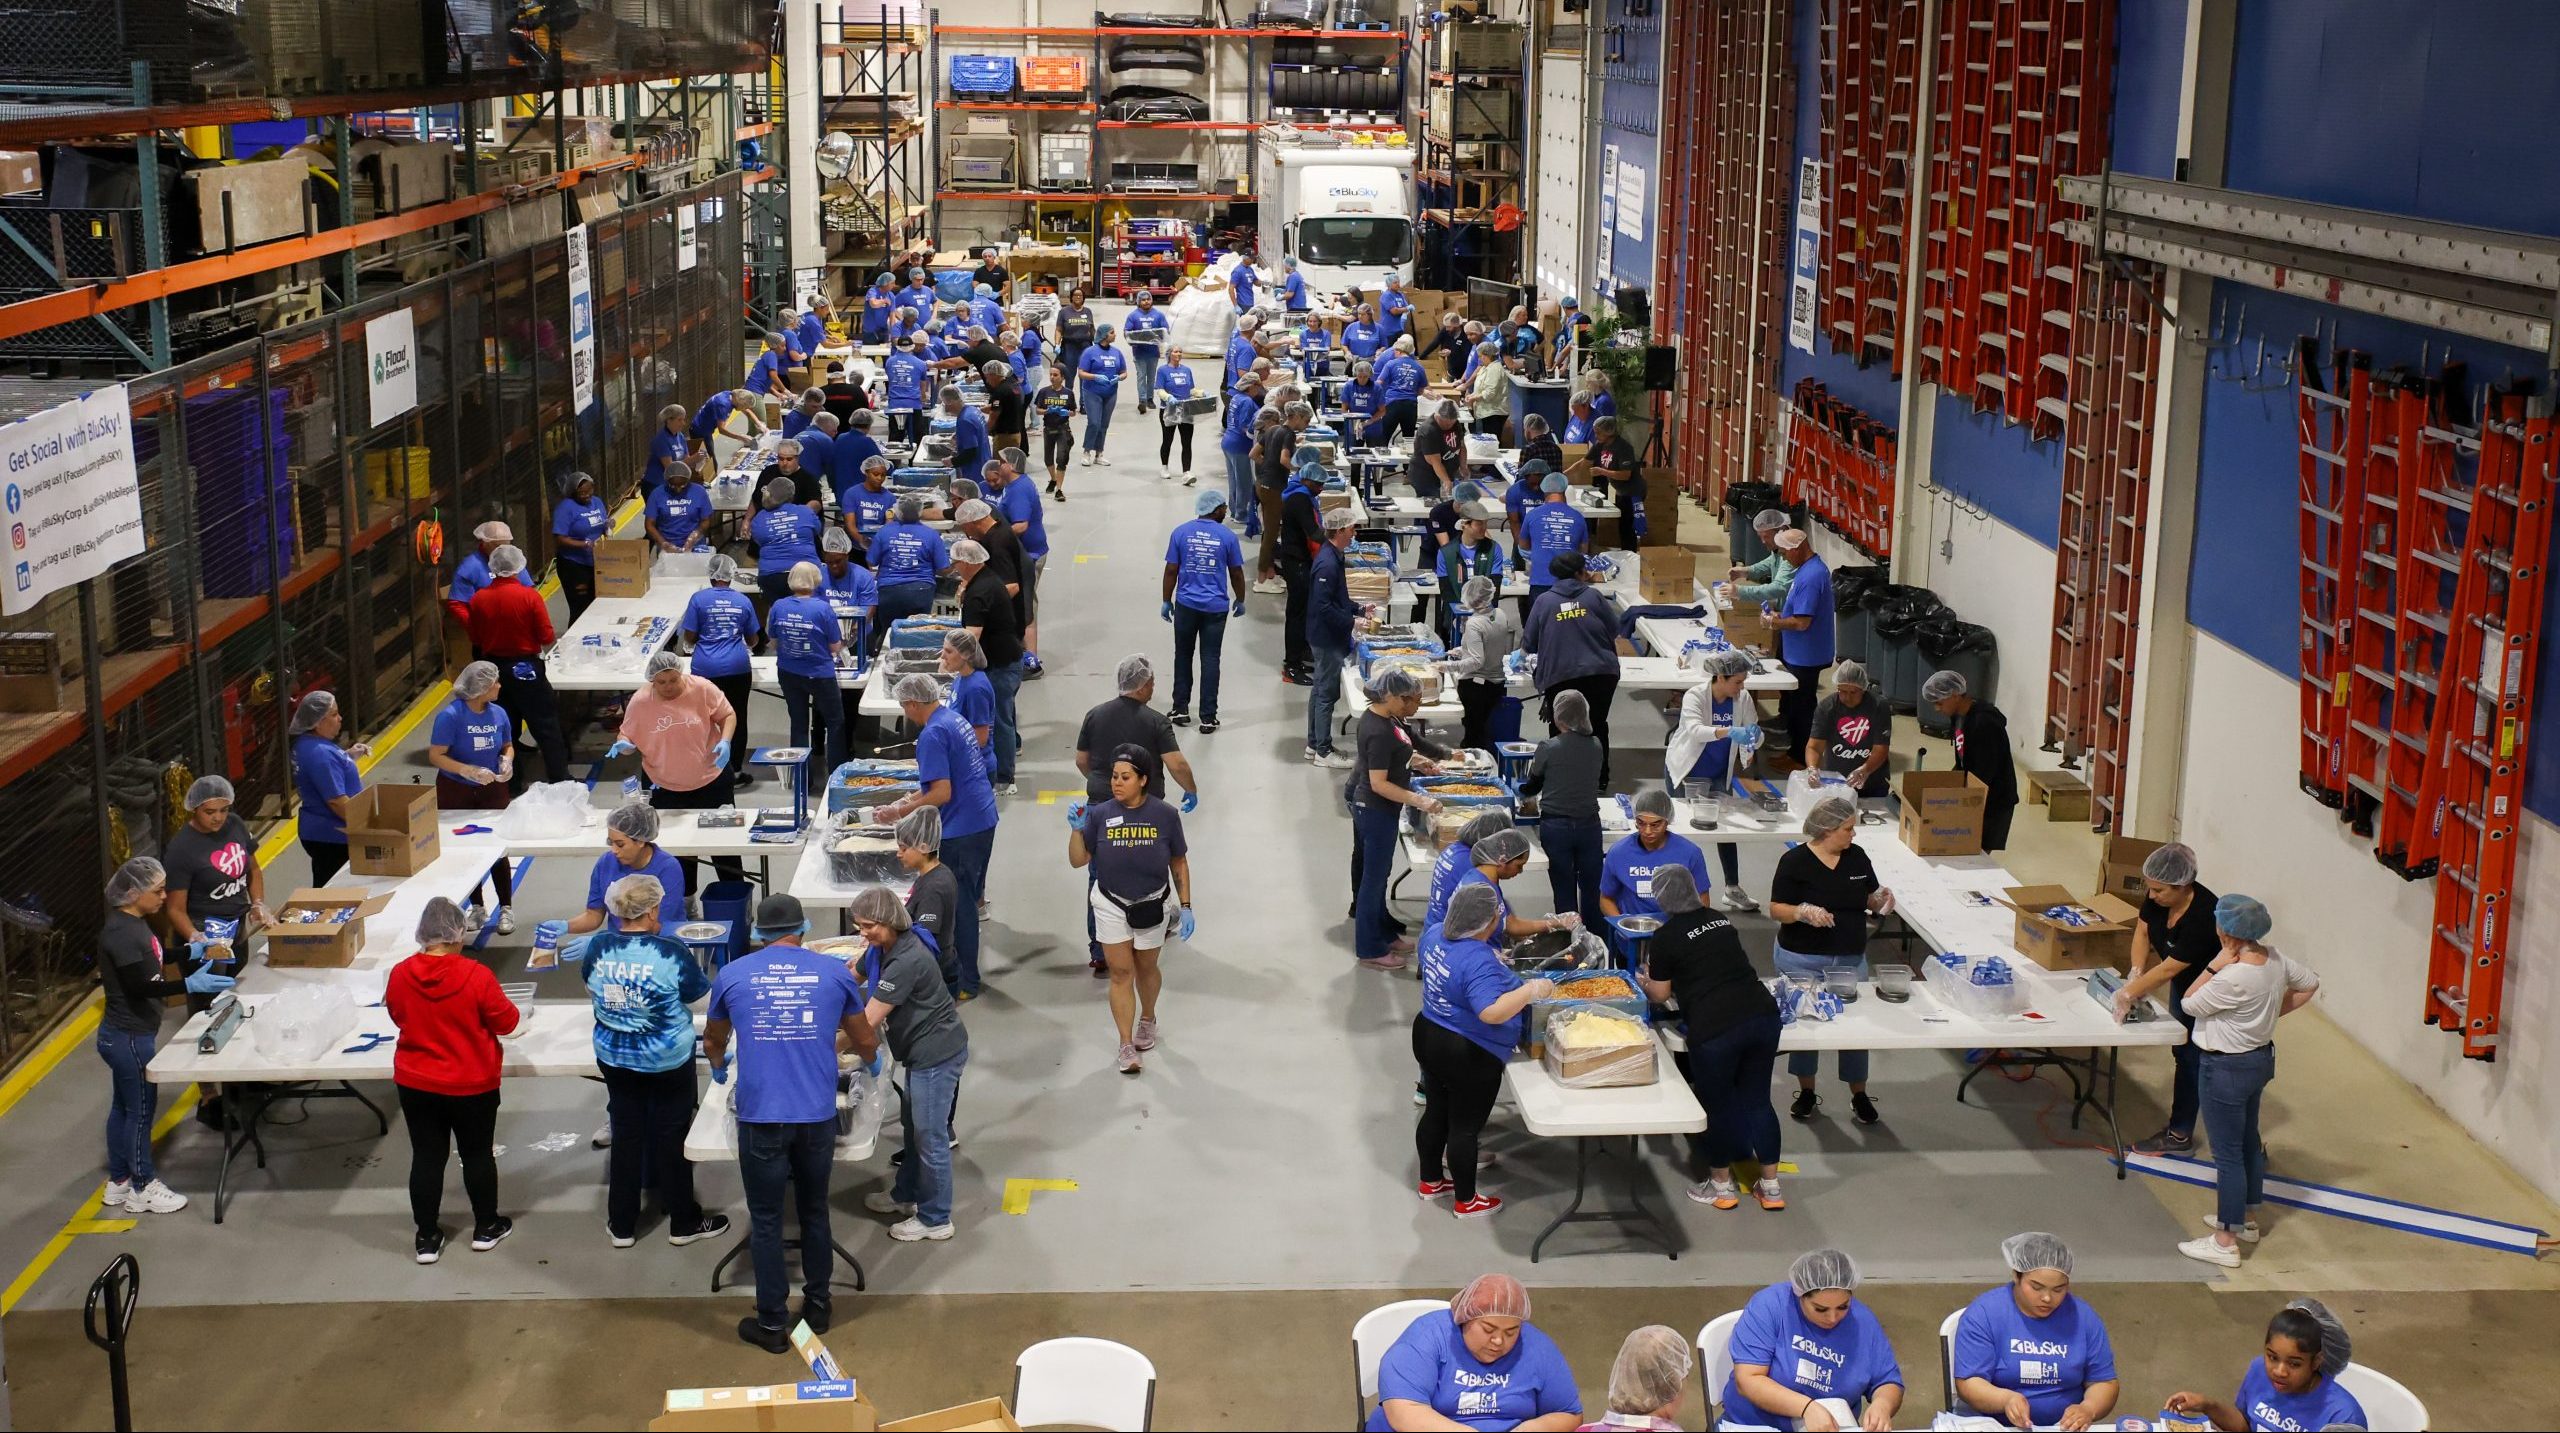 BluSky Chicago Office Succeeds in Packing Over 101,000 Life-Saving Meals